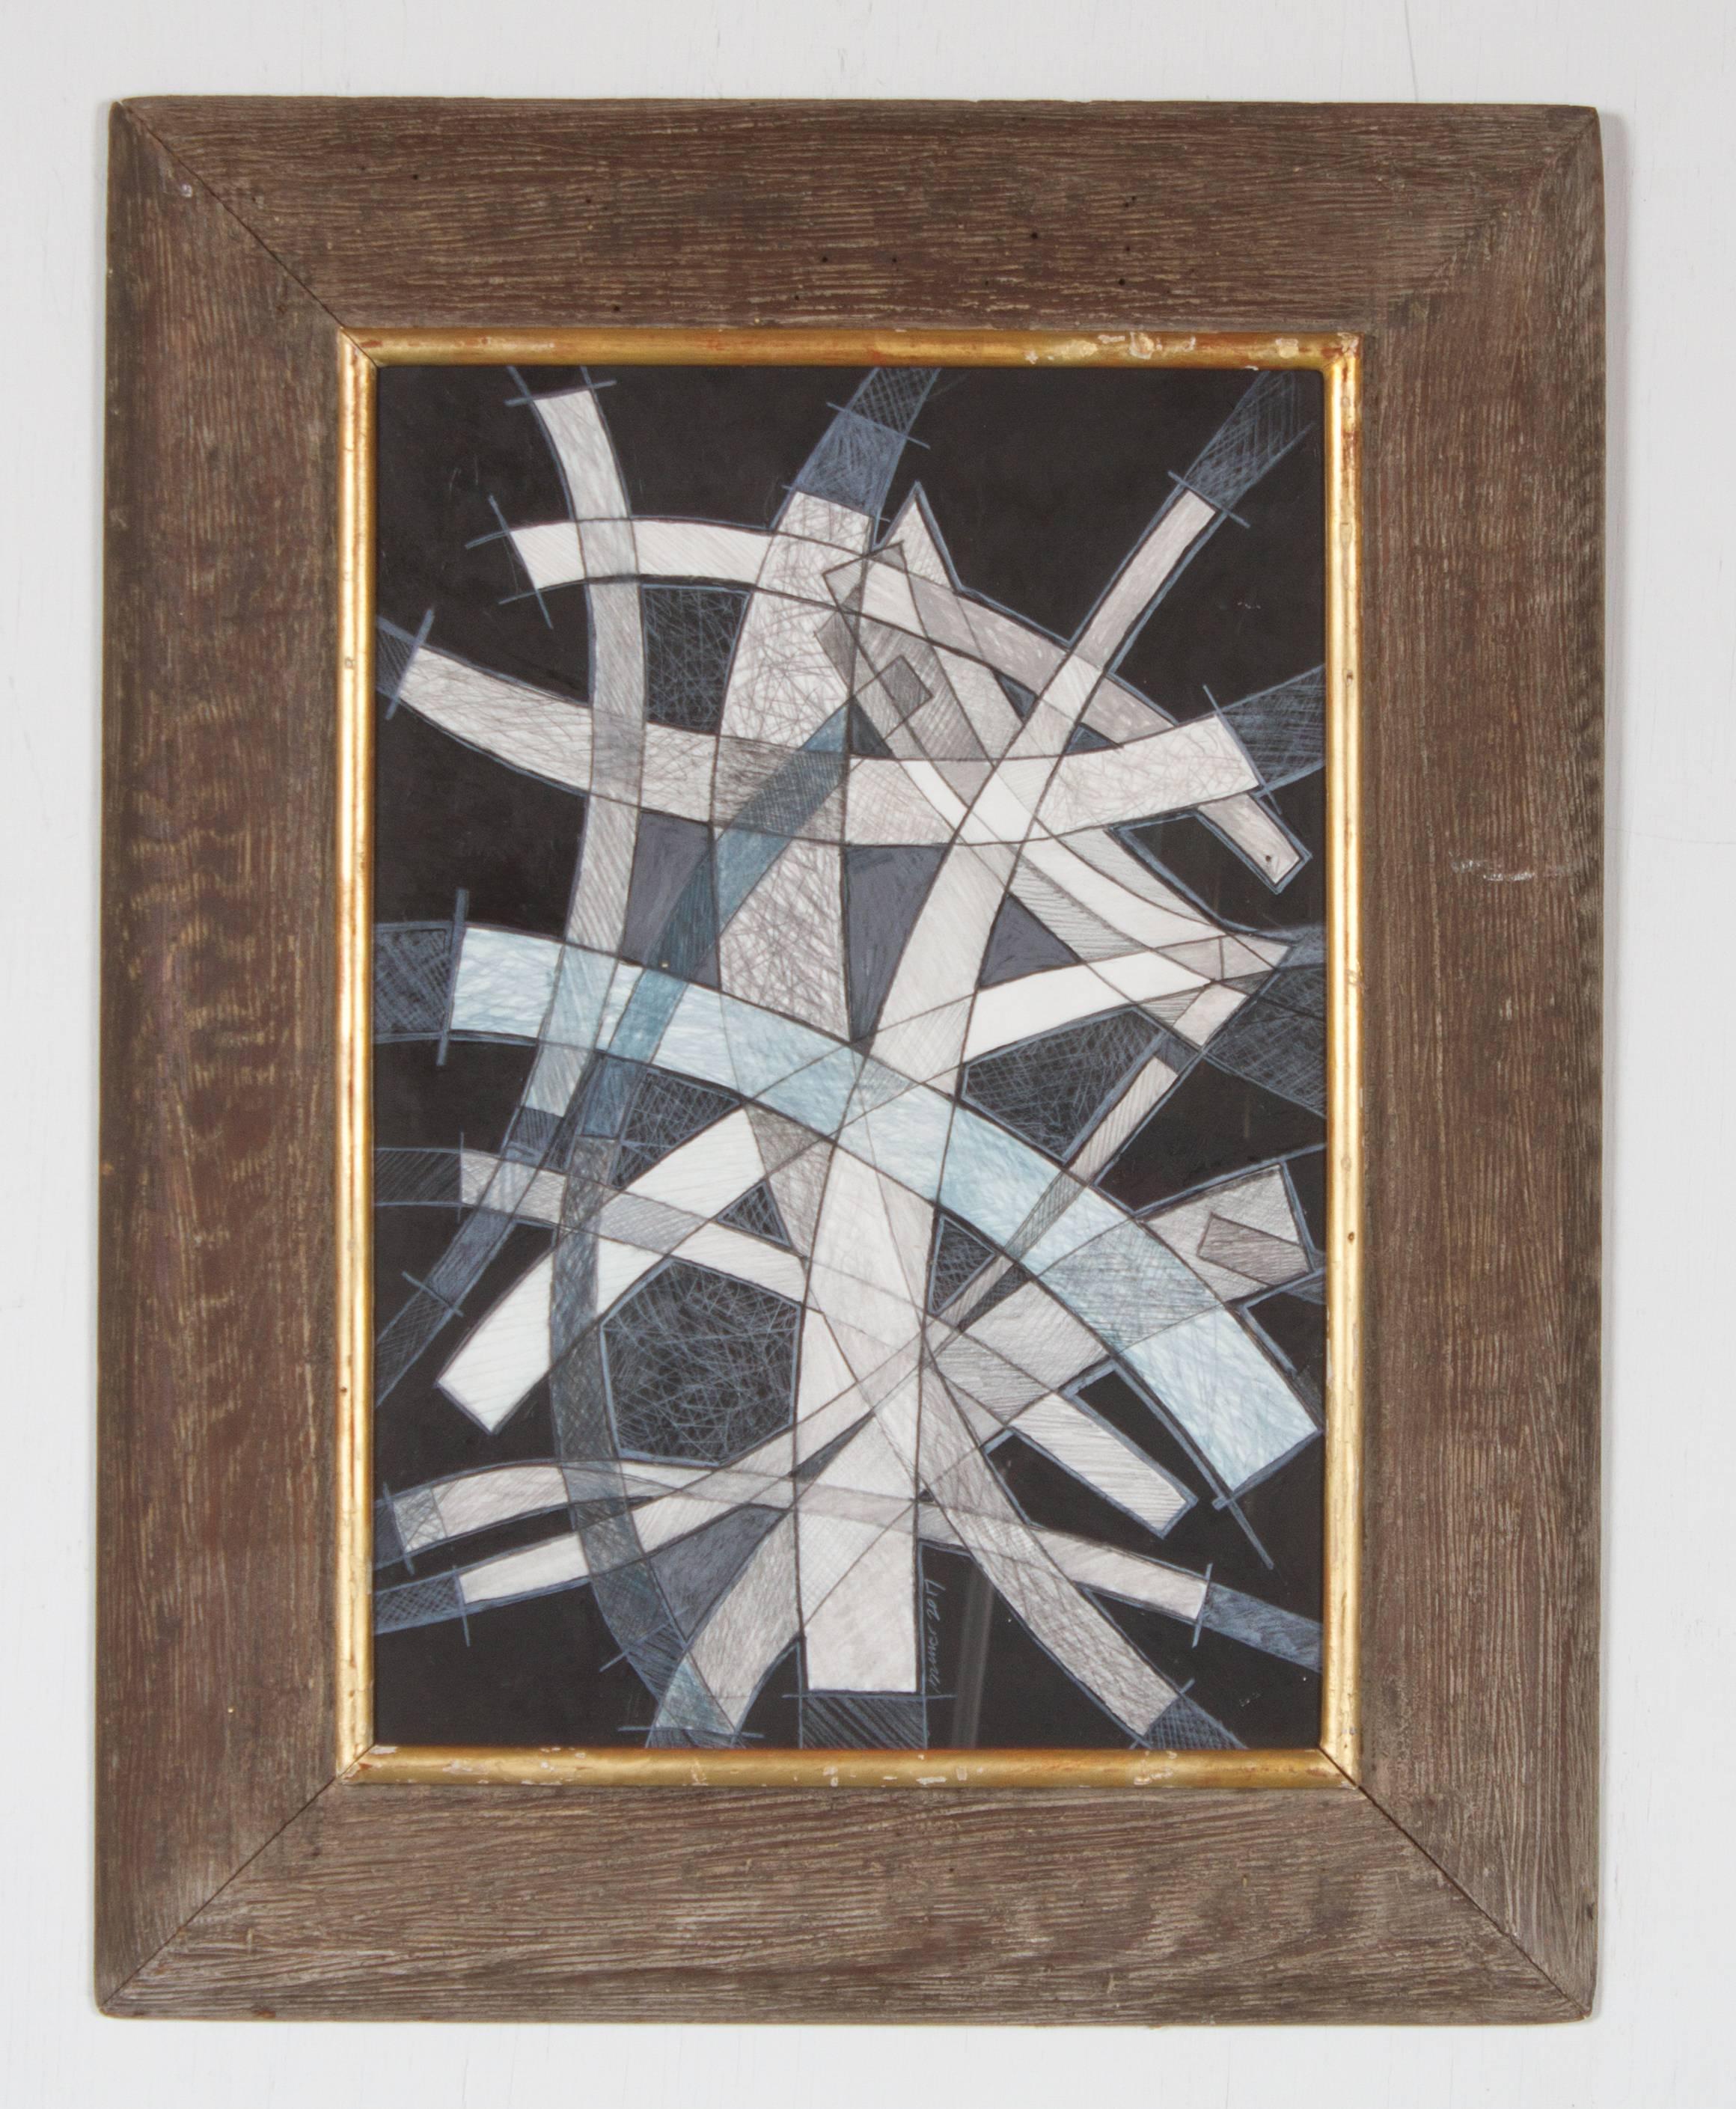 Arcs VI (Graphic, Abstract Drawing on Paper in Antique Wood Frame)  - Art by David Dew Bruner